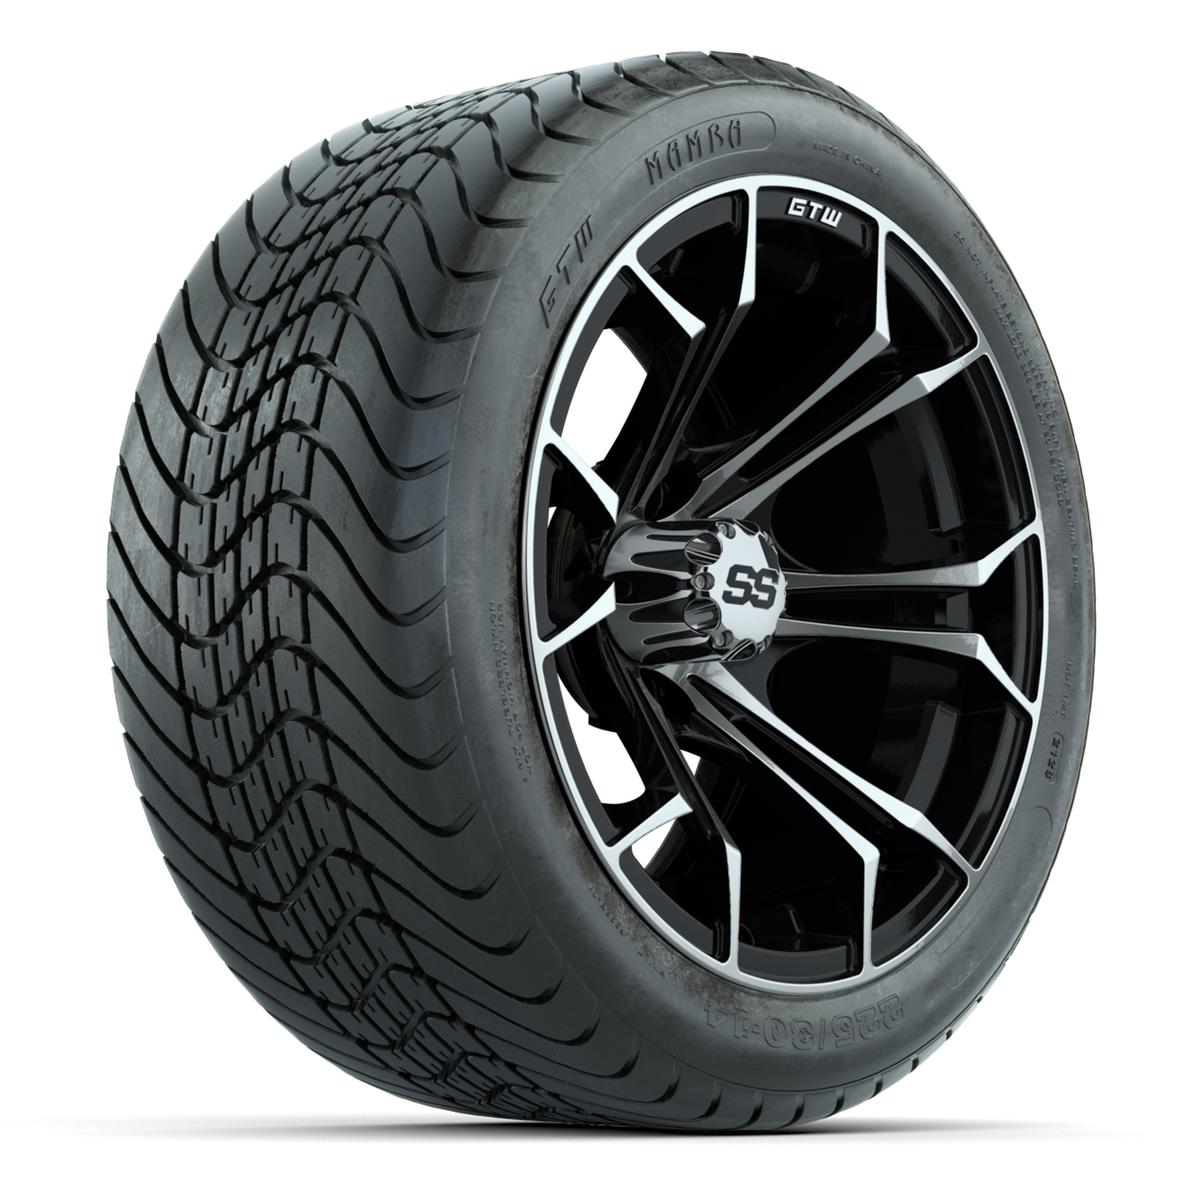 GTW Spyder Machined/Black 14 in Wheels with 225/30-14 Mamba Street Tires – Full Set